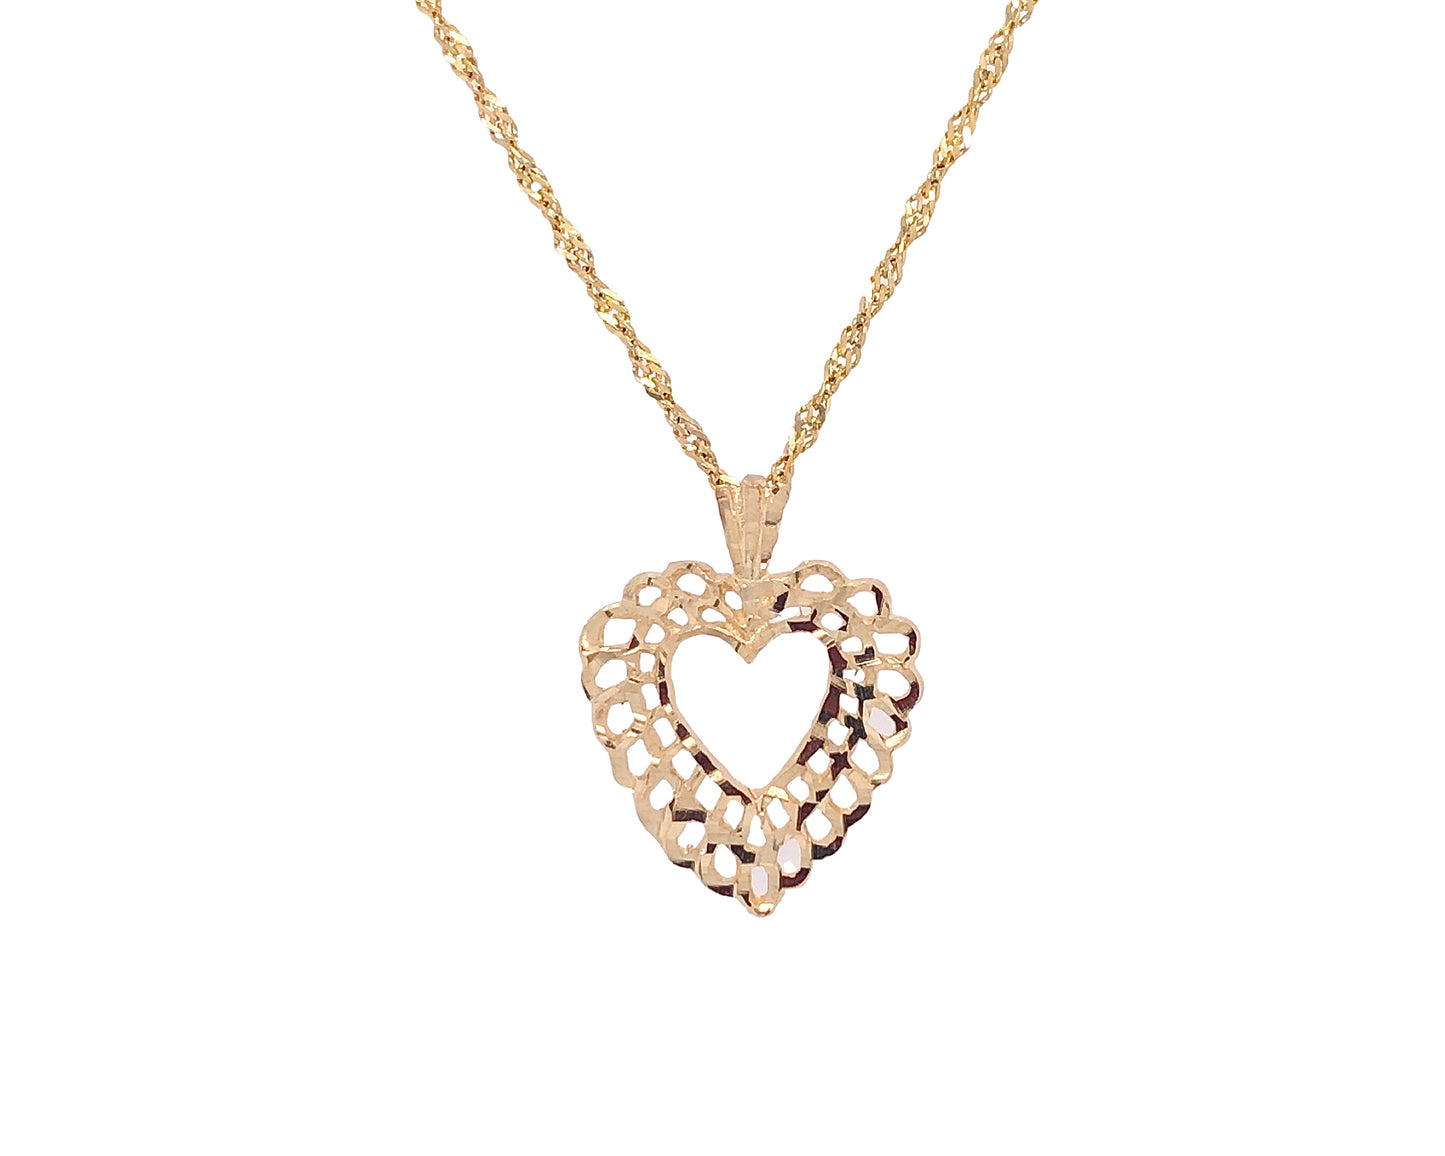 10K Yellow Gold Heart Charm With Chain - perfect jewelry gift for women 